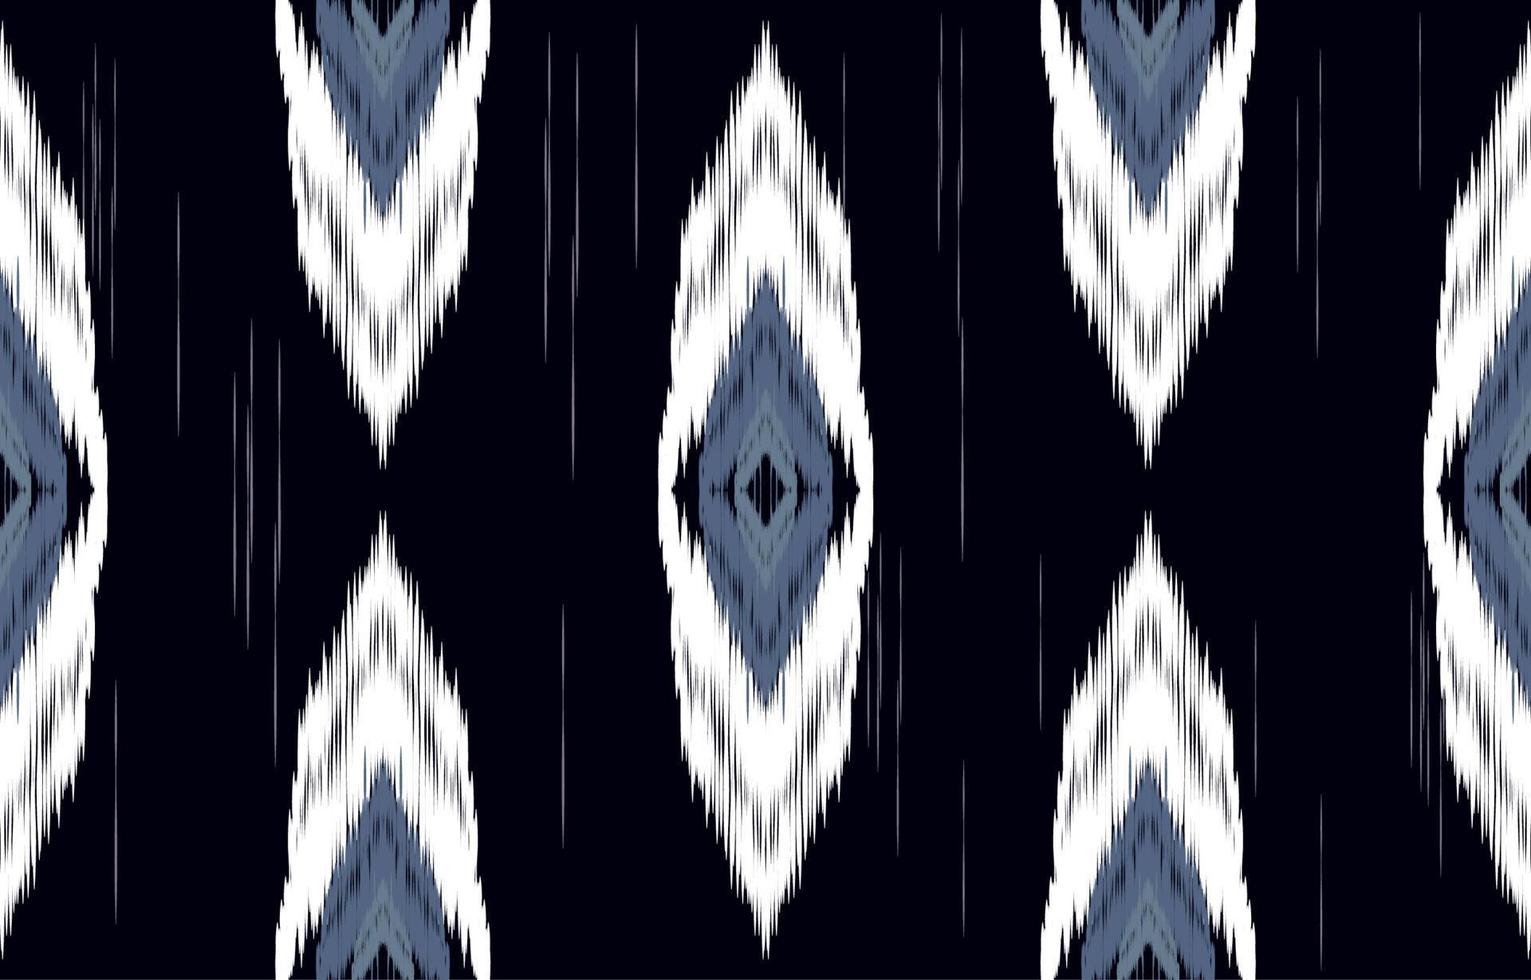 classic blue and white ikat seamless pattern Geometric ethnic oriental  traditional embroidery style.Design for background,carpet,mat,wallpaper,clothing,wrapping,Batik,fabric,Vector illustration. vector